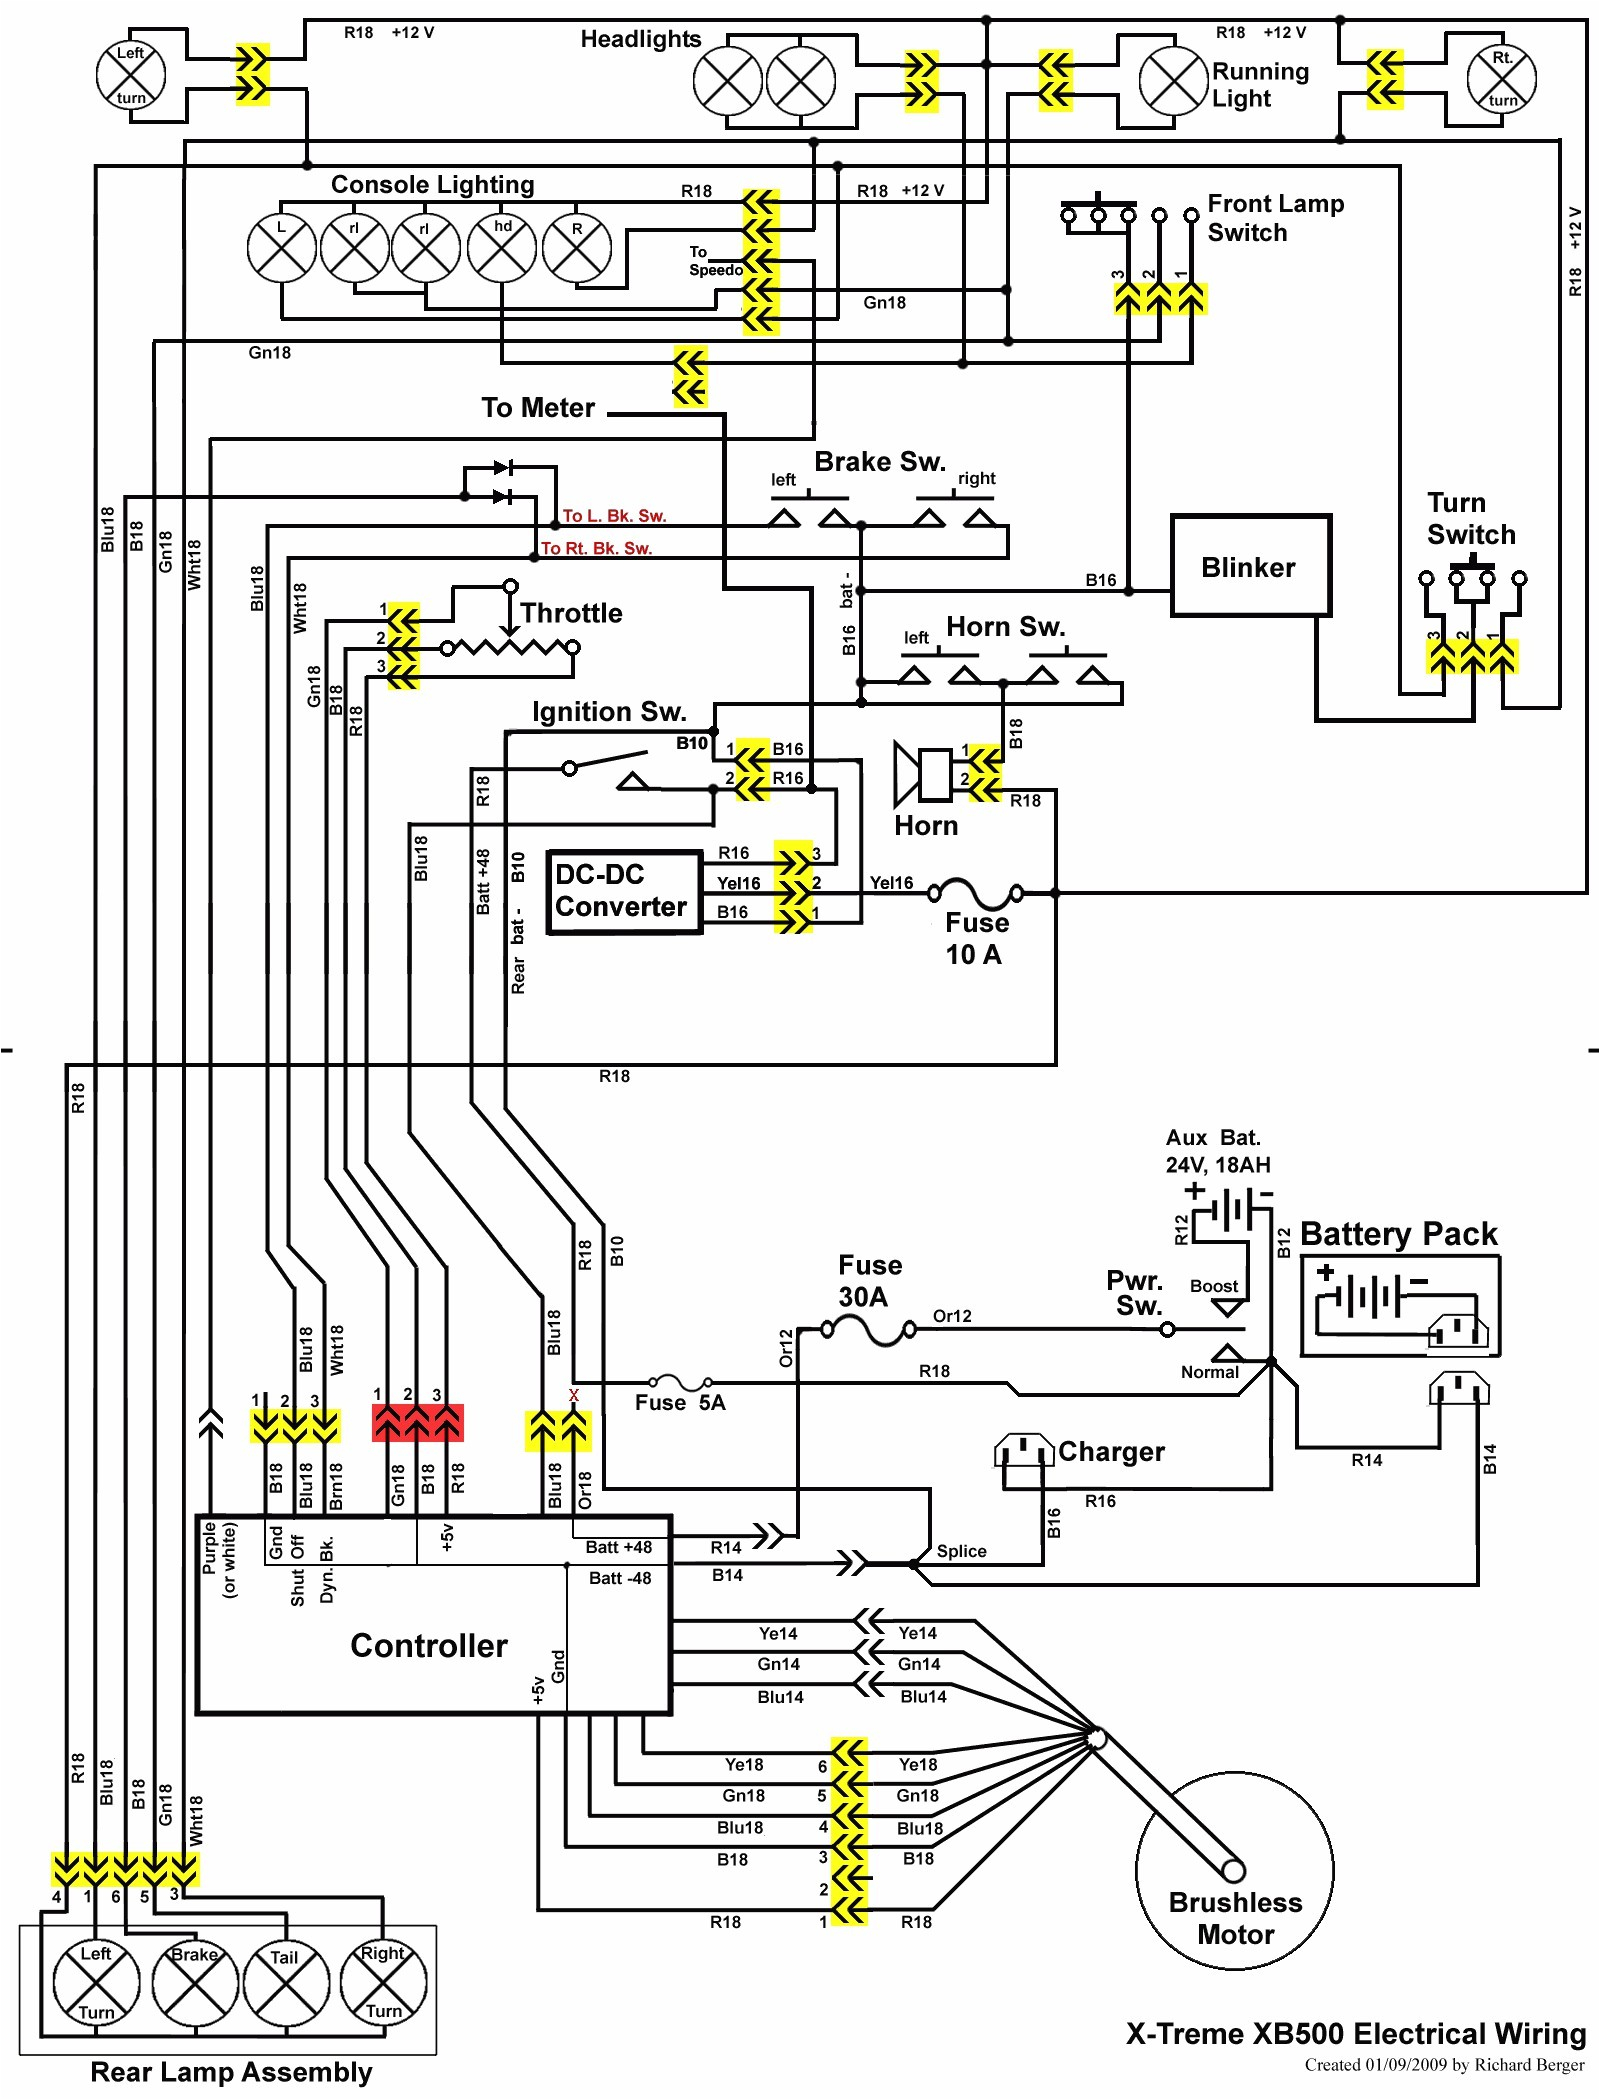 curtis controller wiring diagram awesome baja scooter 48 volt wiring schematic wire center e280a2 of curtis controller wiring diagram jpg